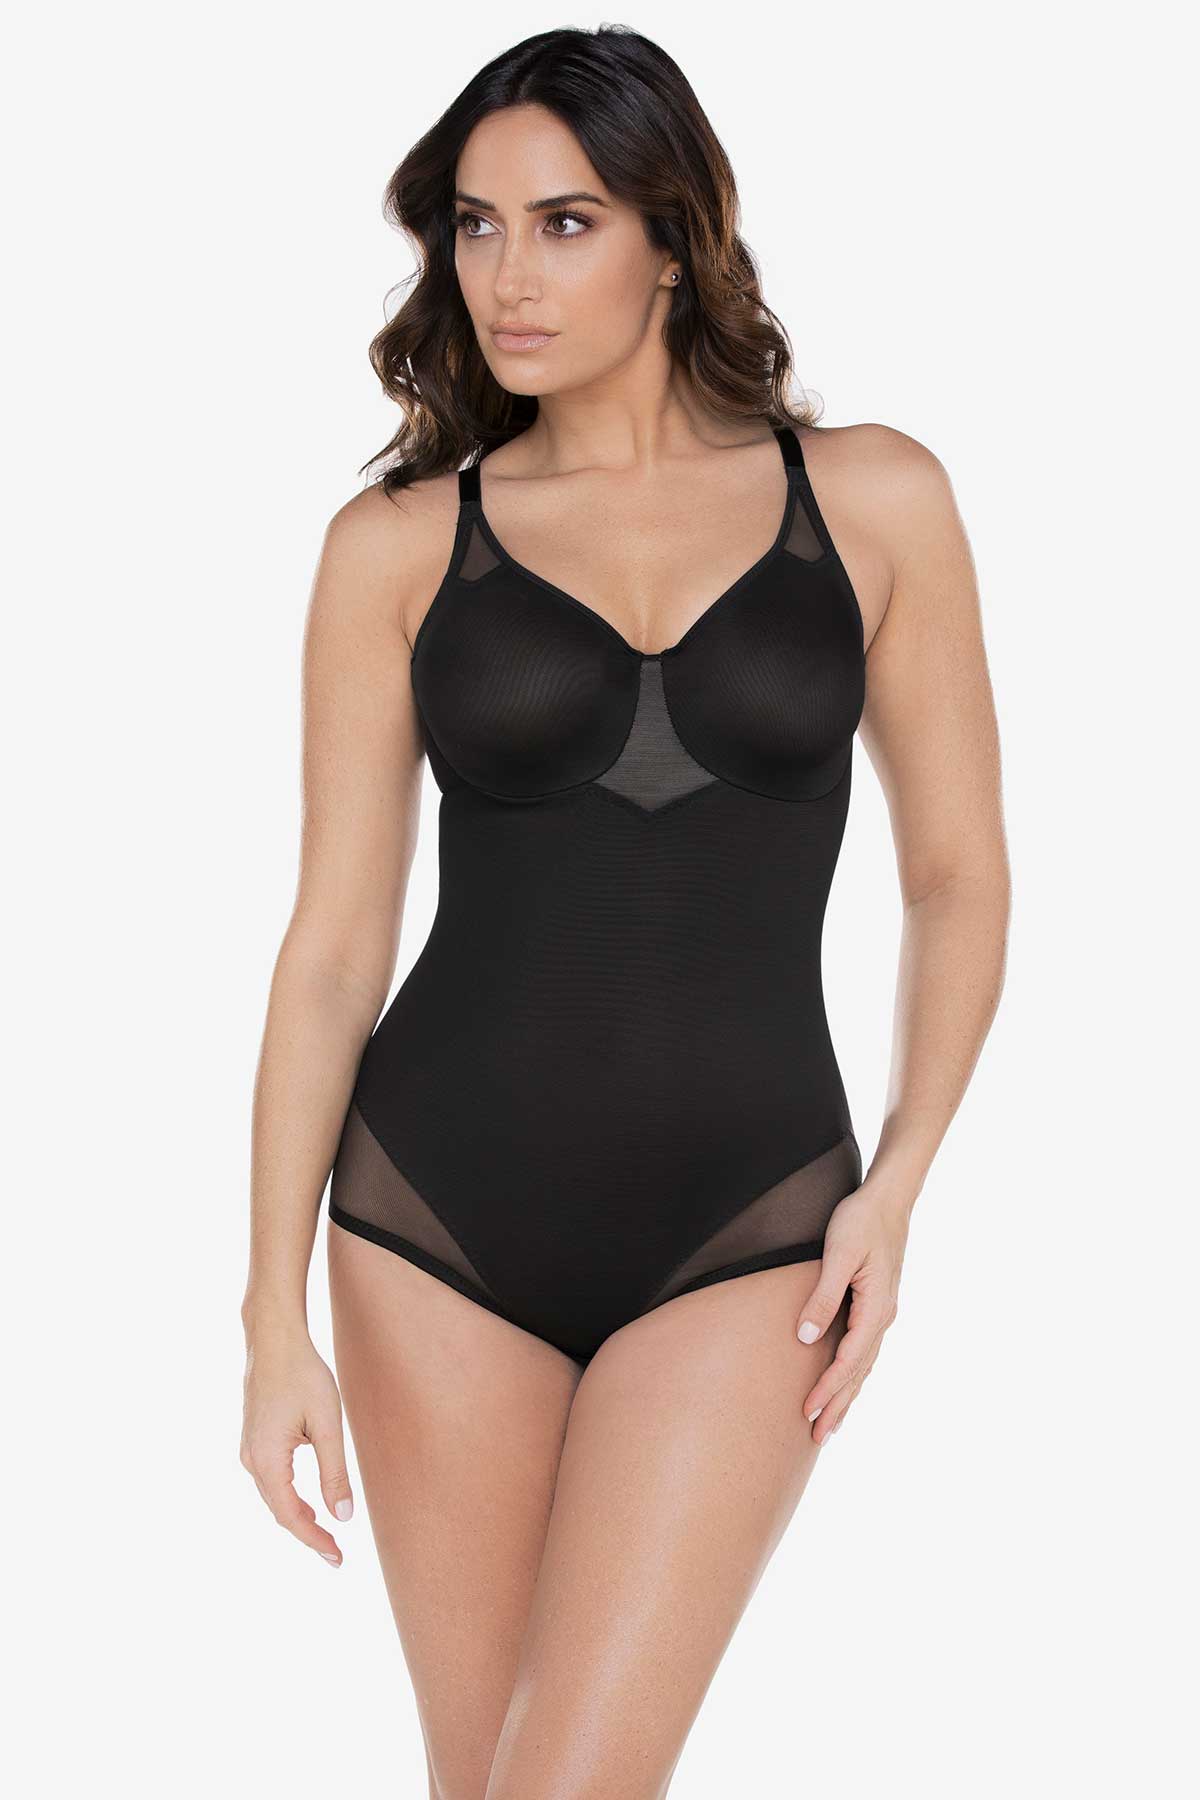 Extra Firm Sexy Sheer Shaping Bodybriefer